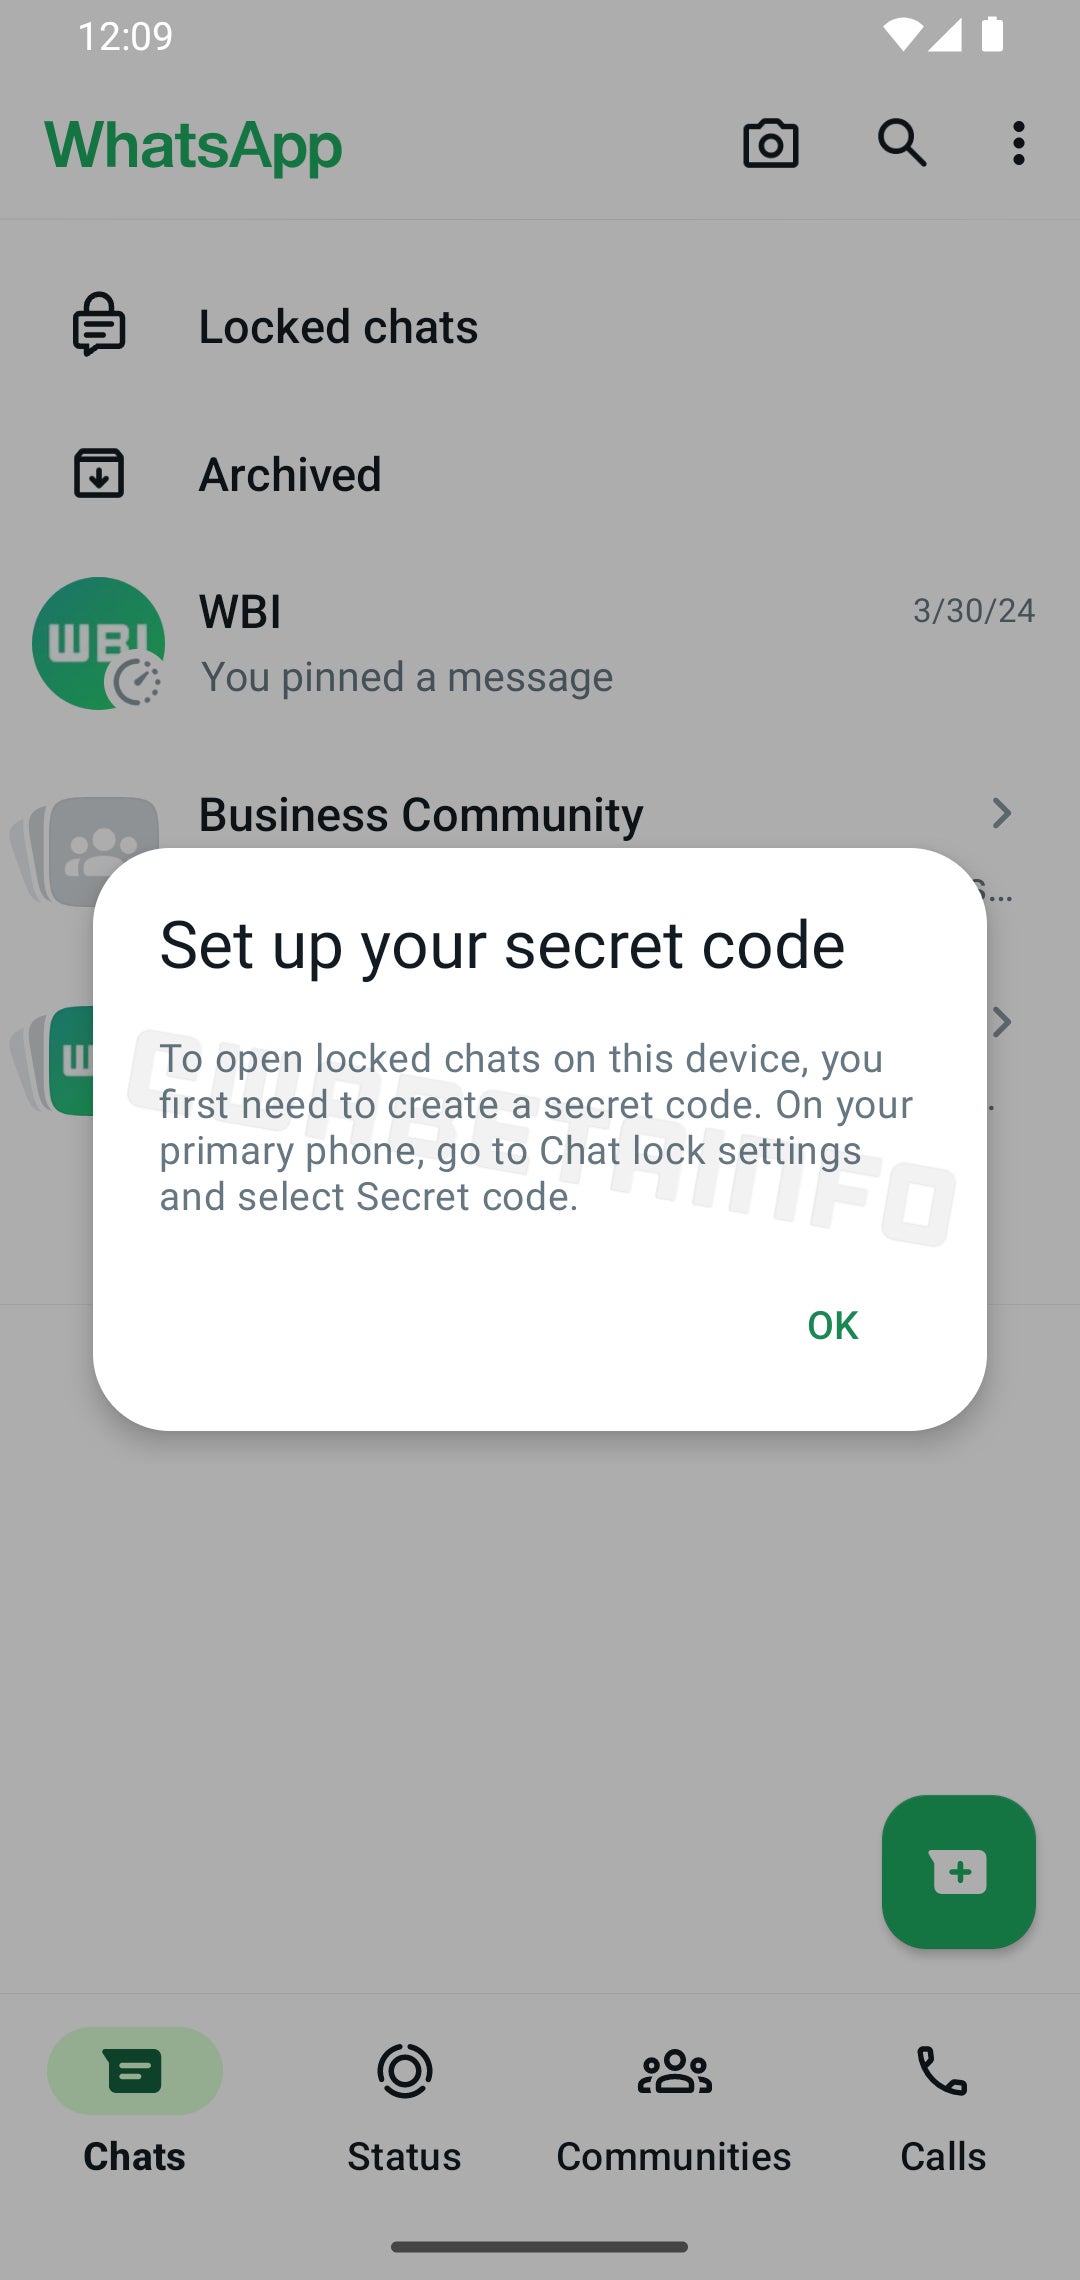 Upcoming WhatsApp feature for locked chats on linked devices, as seen in the latest beta (Image Credit–WABetaInfo) - WhatsApp’s locked chats set to sync across all your linked devices